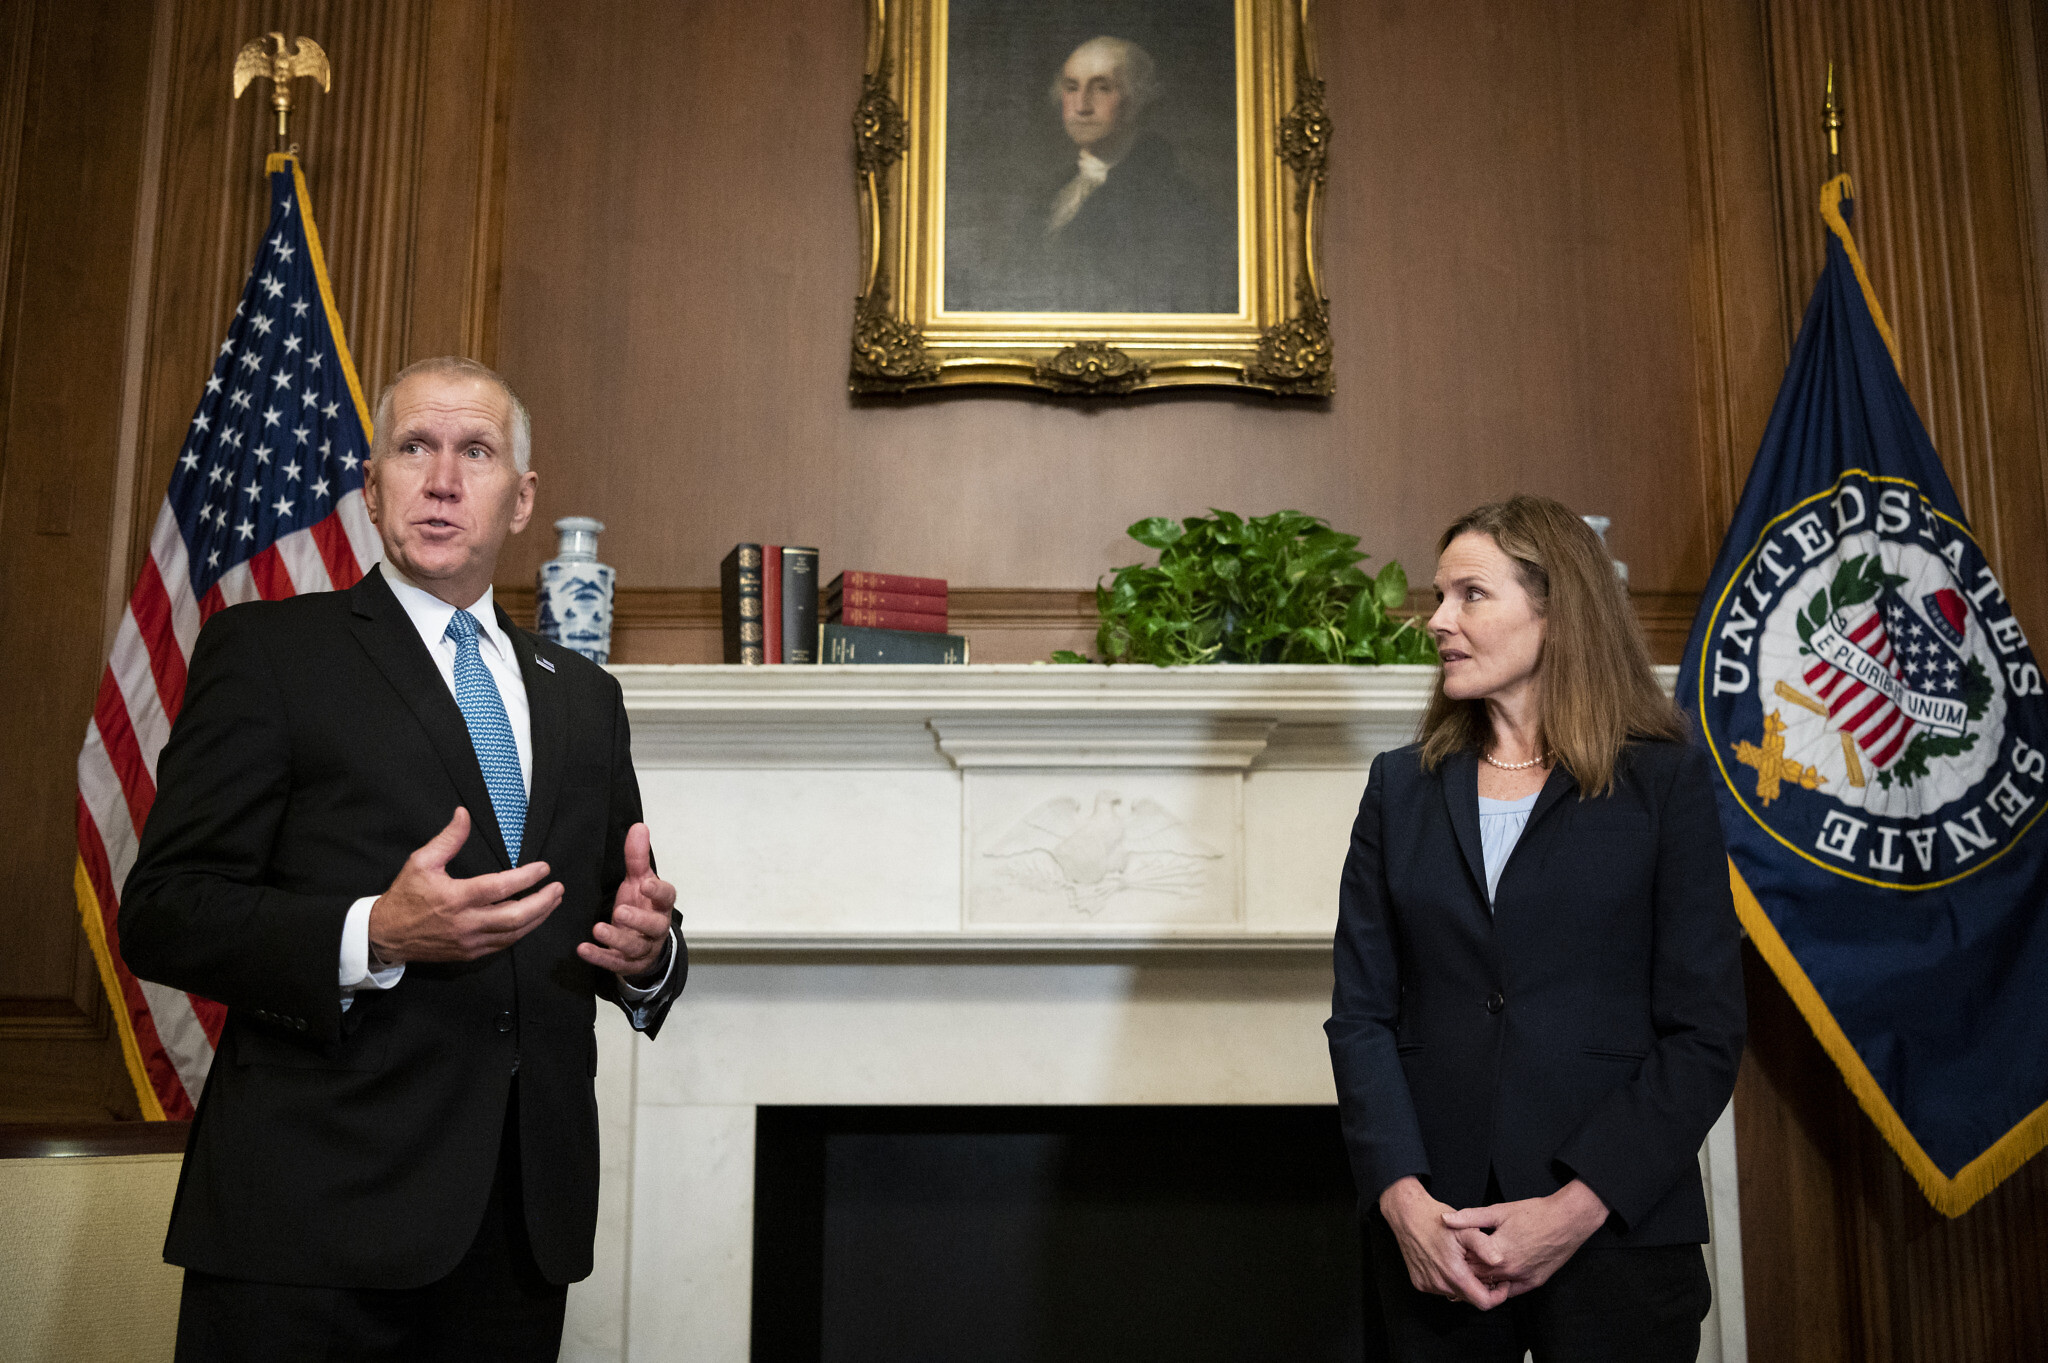 Amy Coney Barrett's Supreme Court Confirmation Will Move Forward, McConnell Says